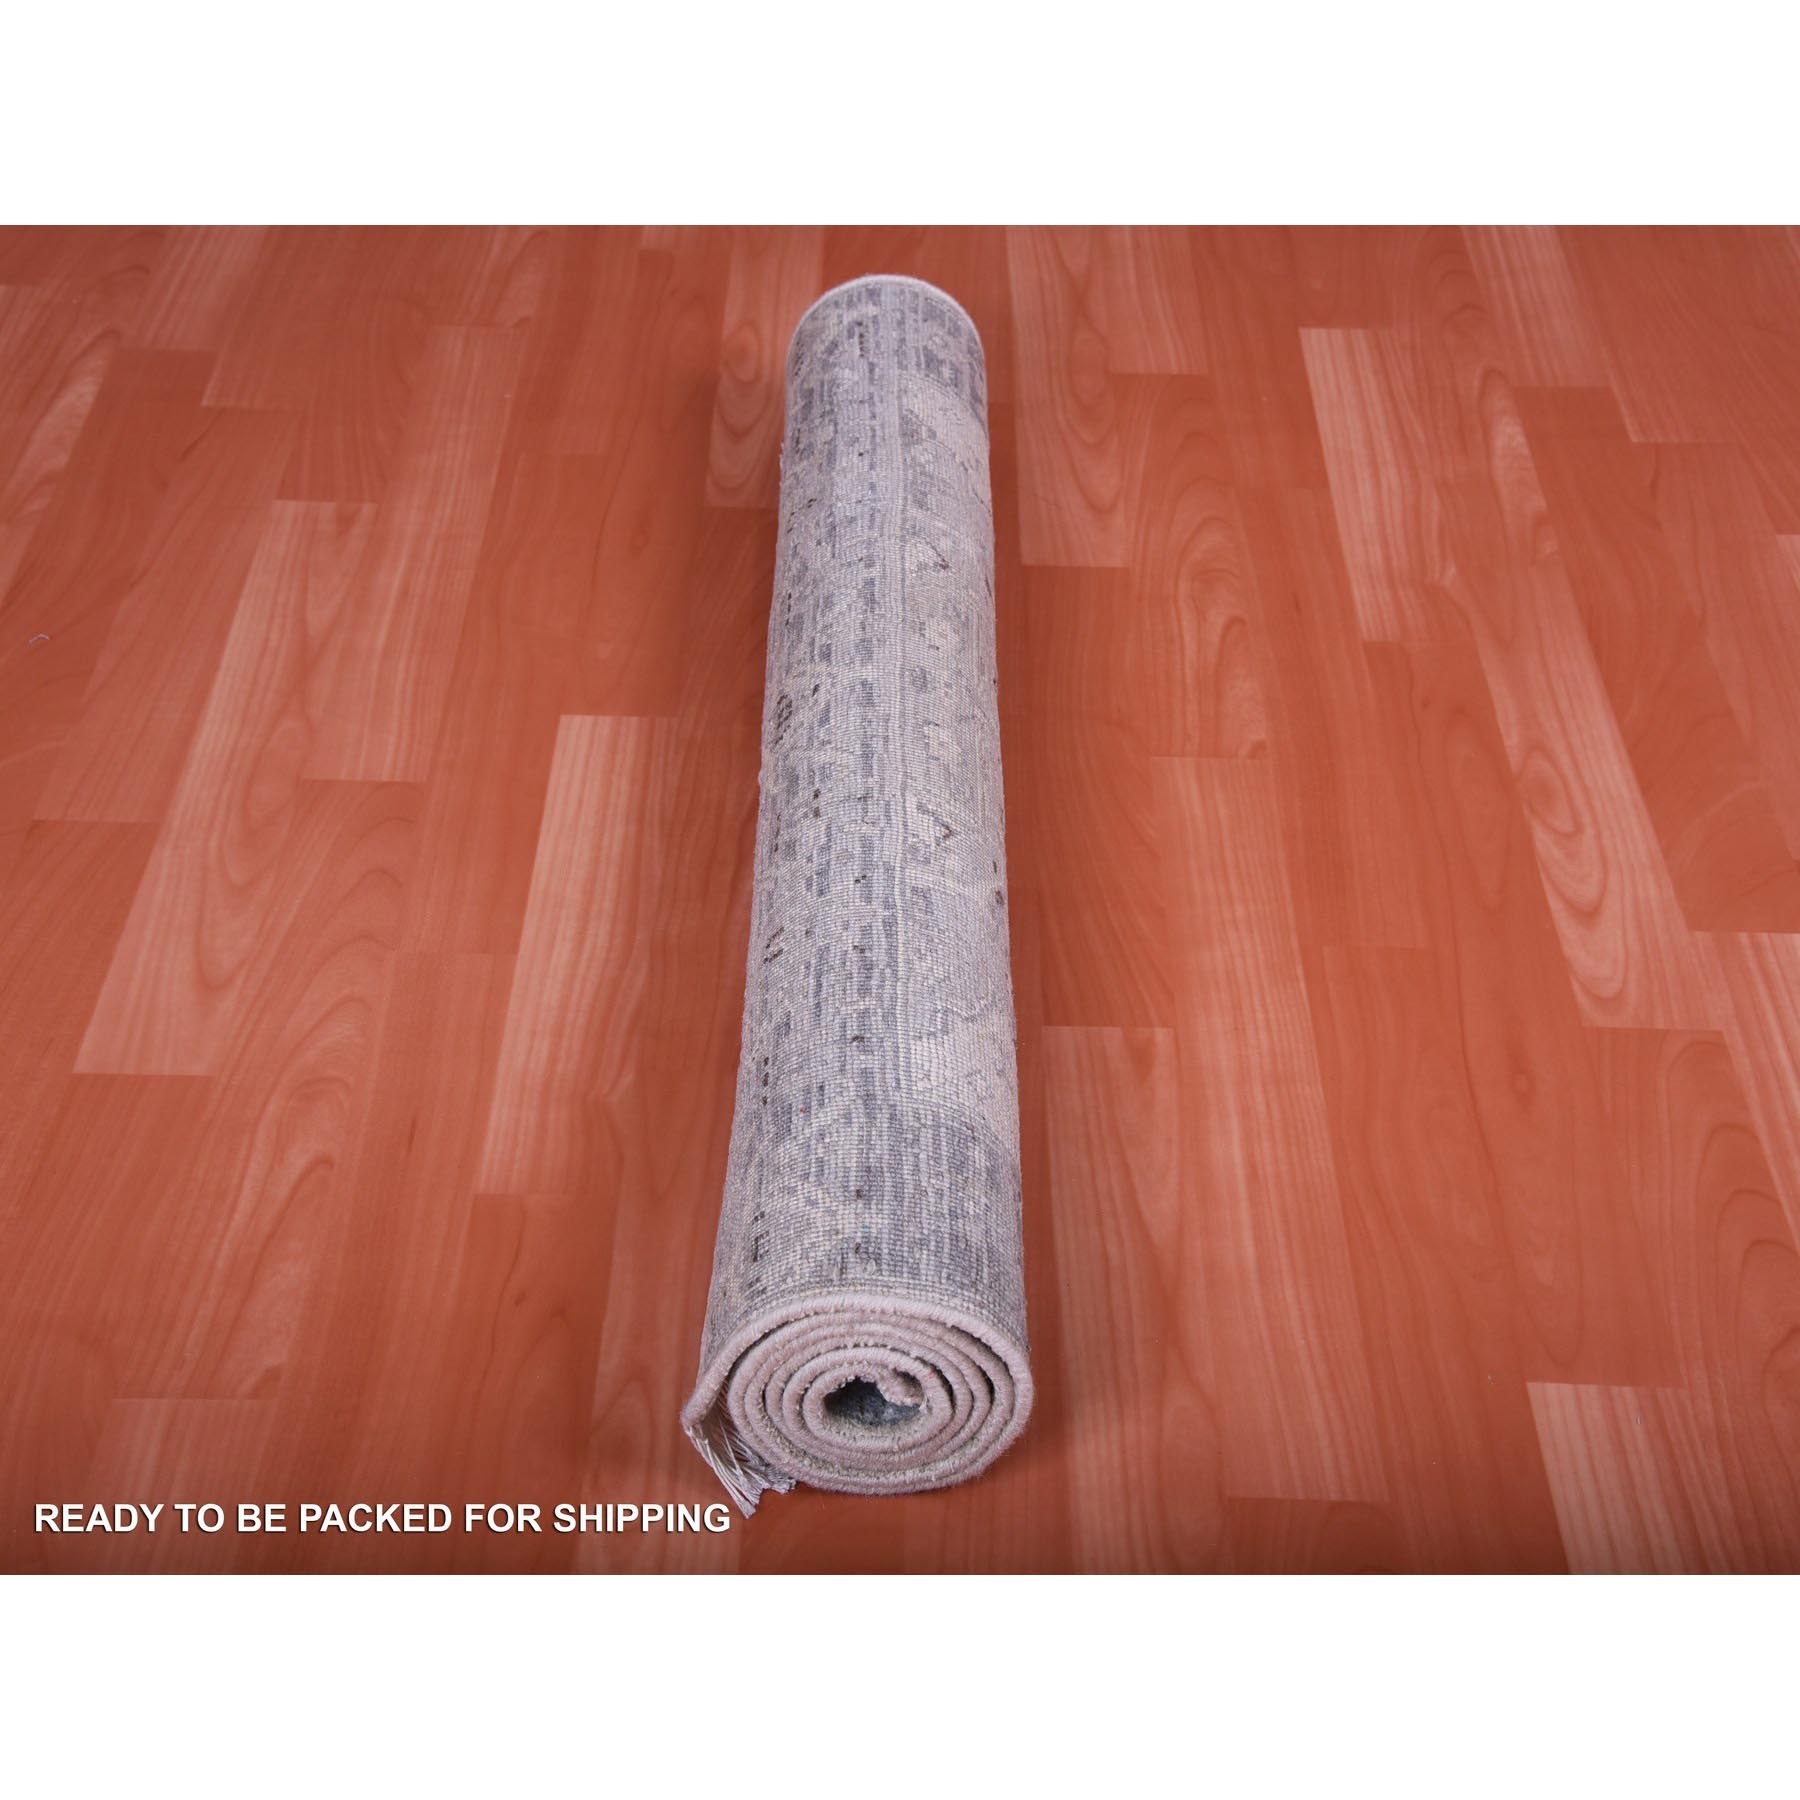 Transitional-Hand-Knotted-Rug-375200